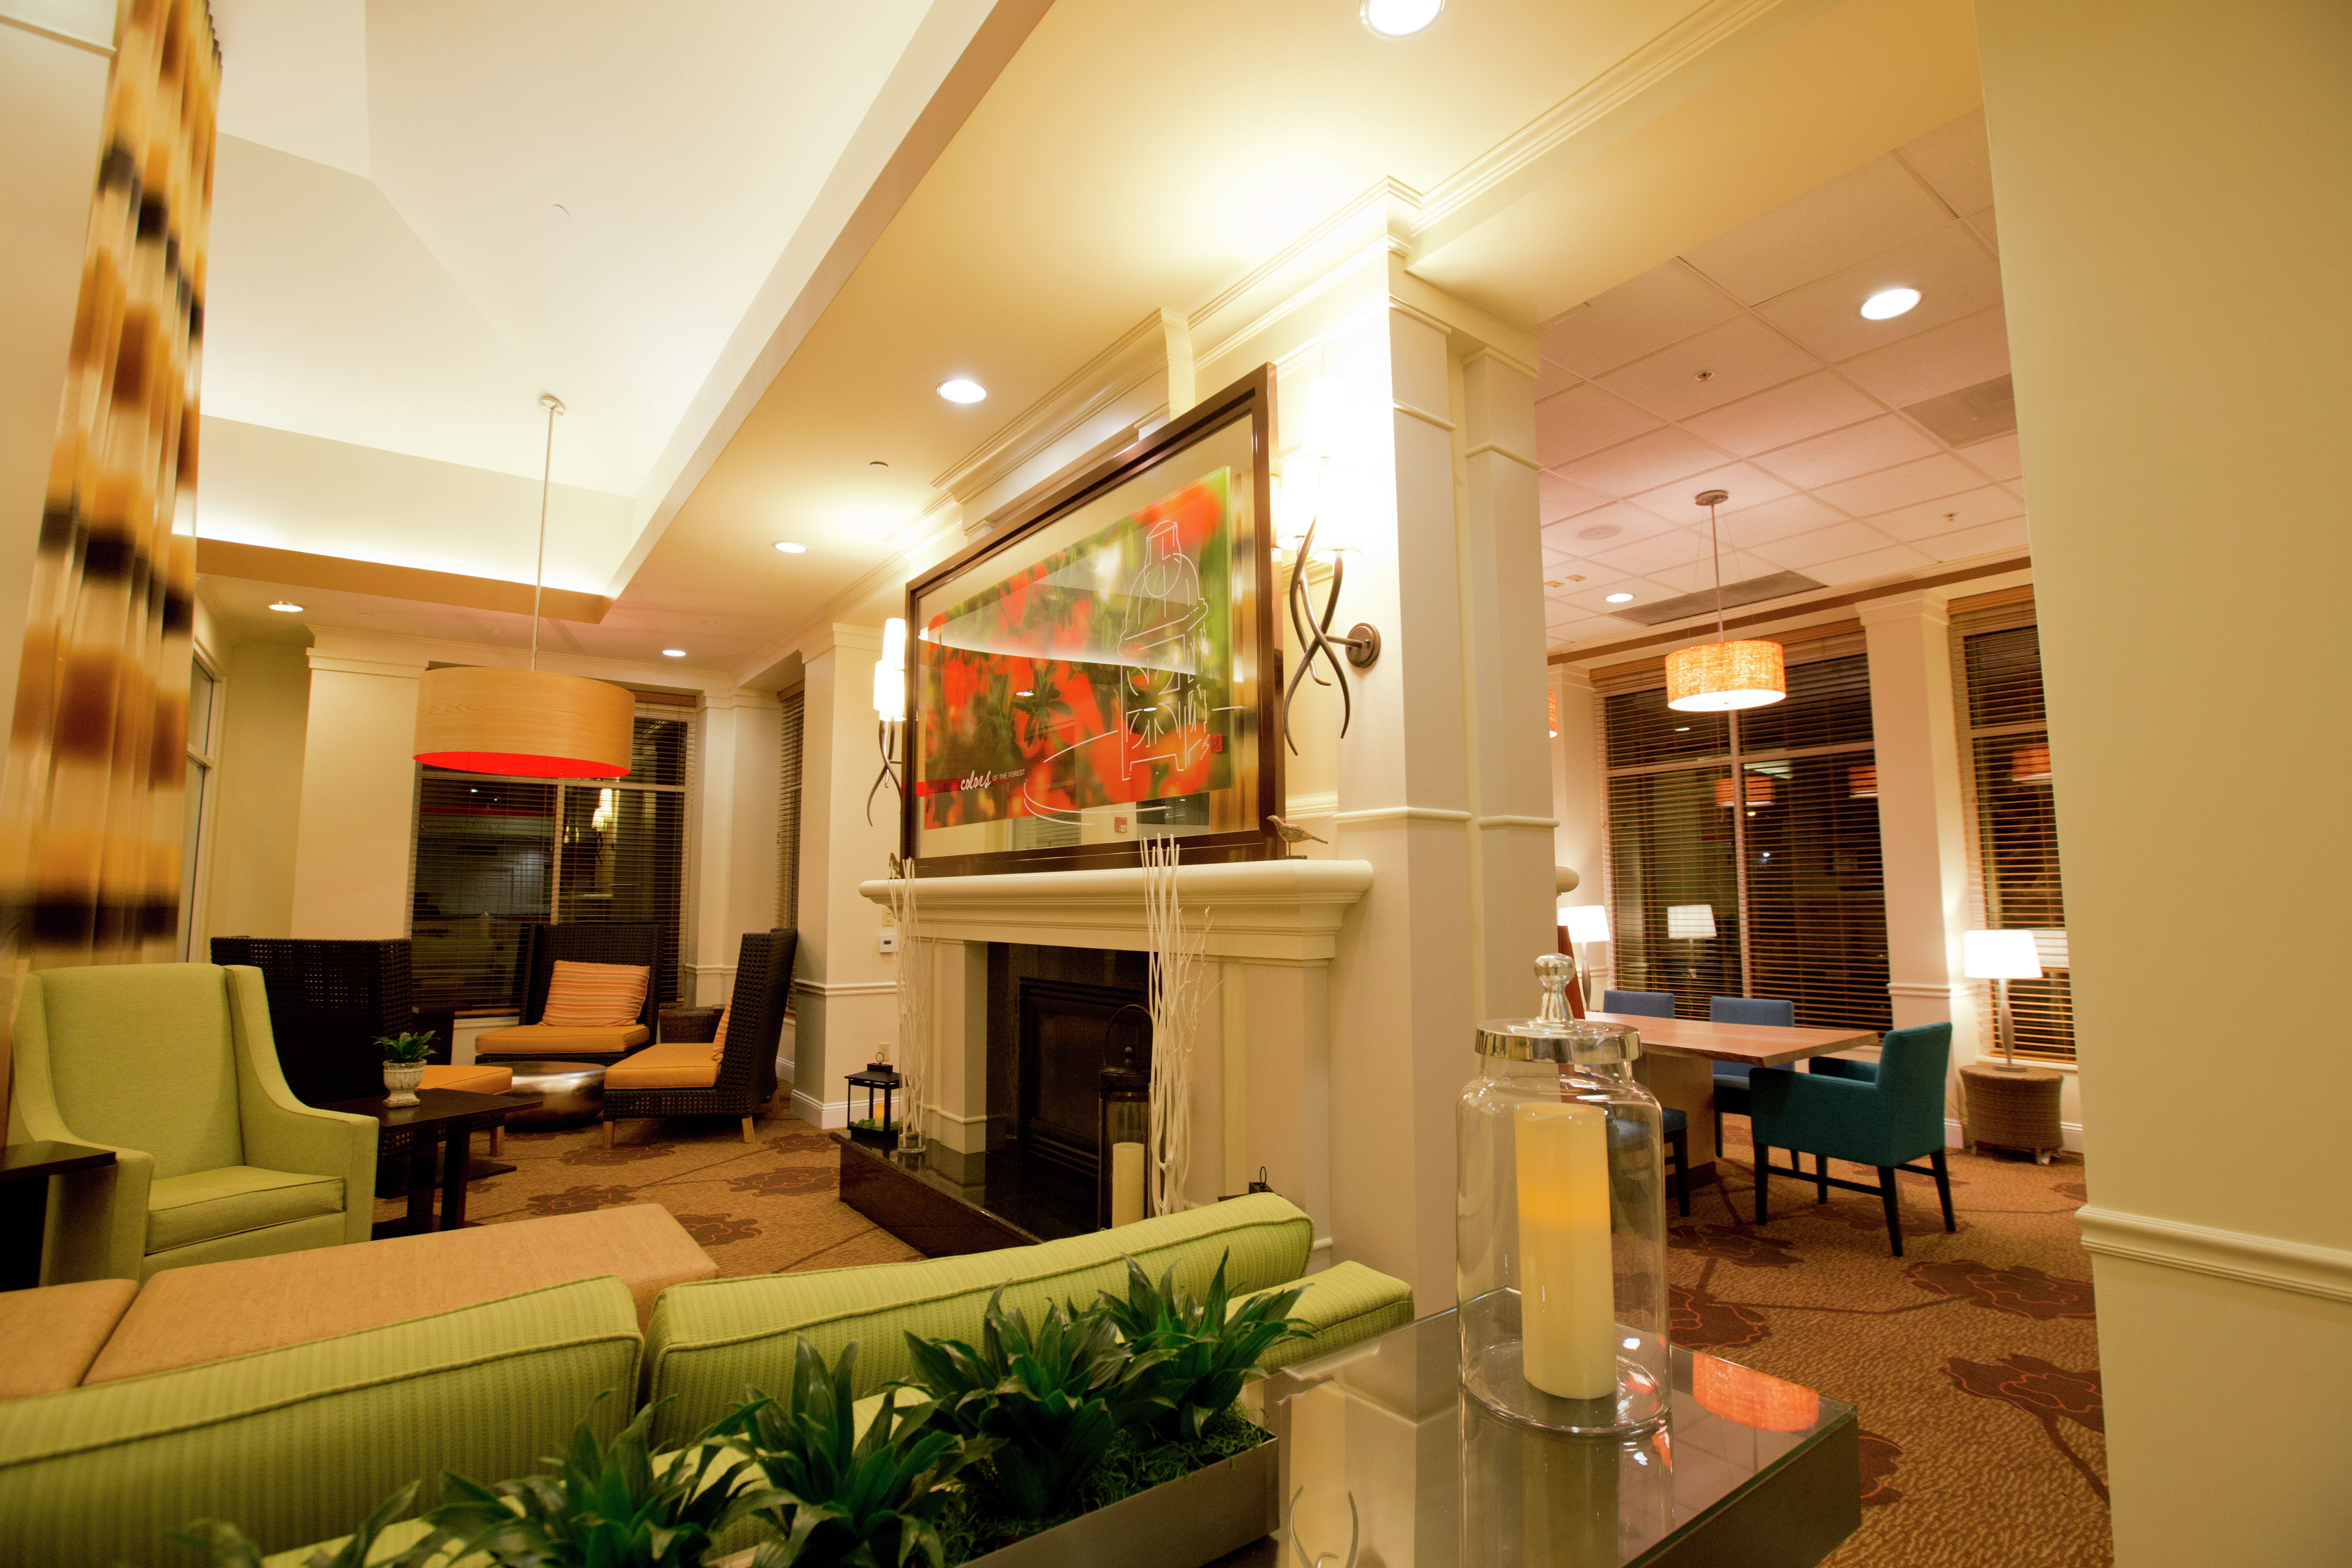 Fireplace With Art Feature, and Mixed Seating in Lobby Lounge Area